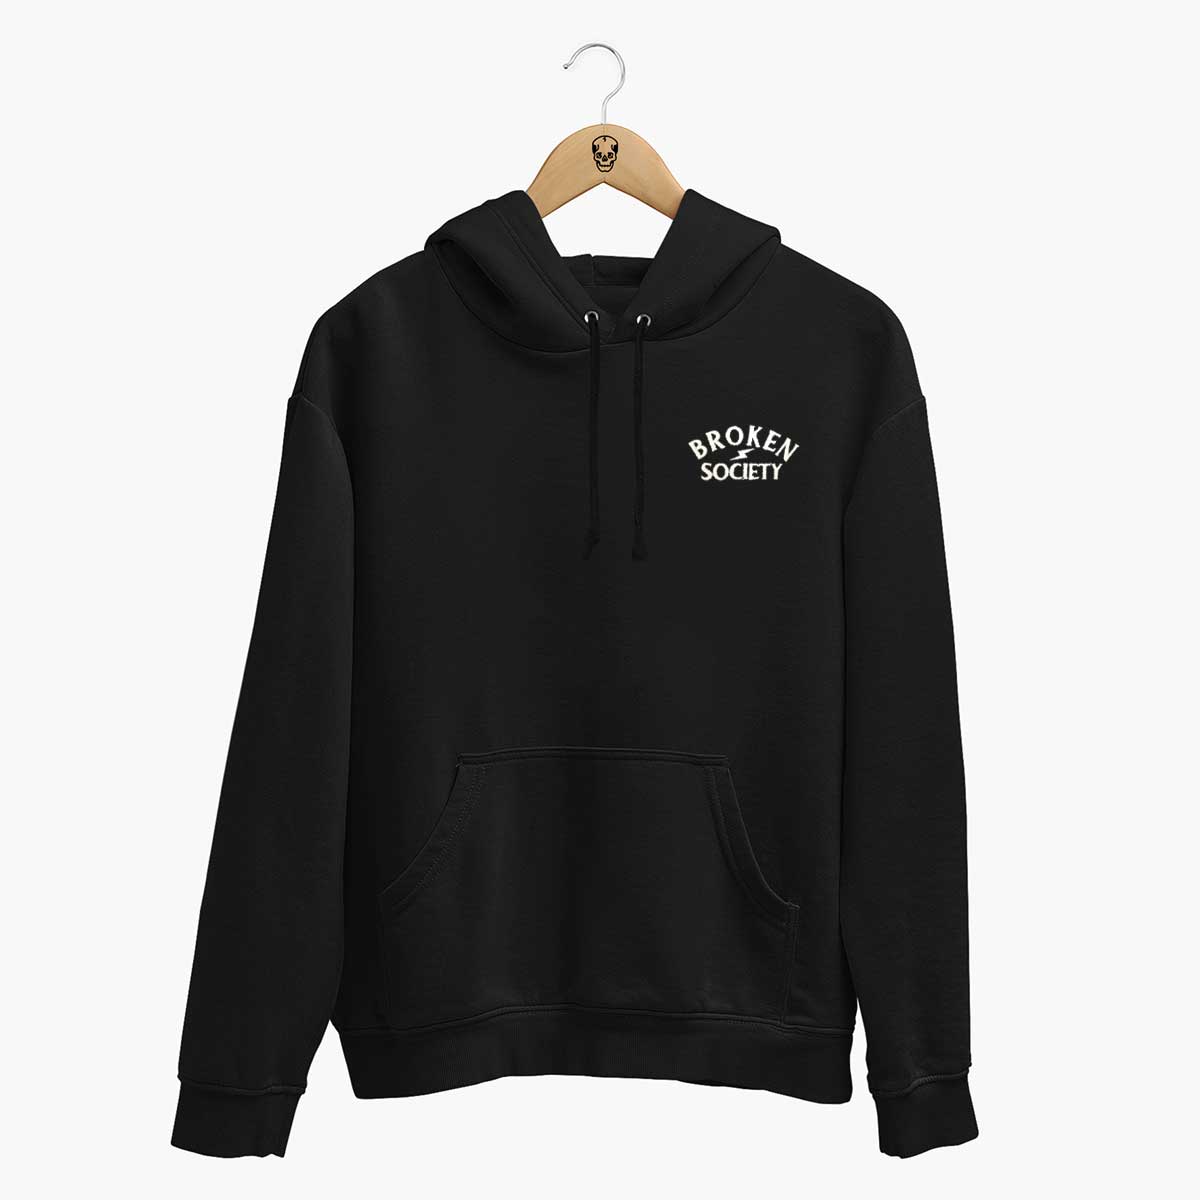 Broken Society Embroidered Hoodie (Unisex) product